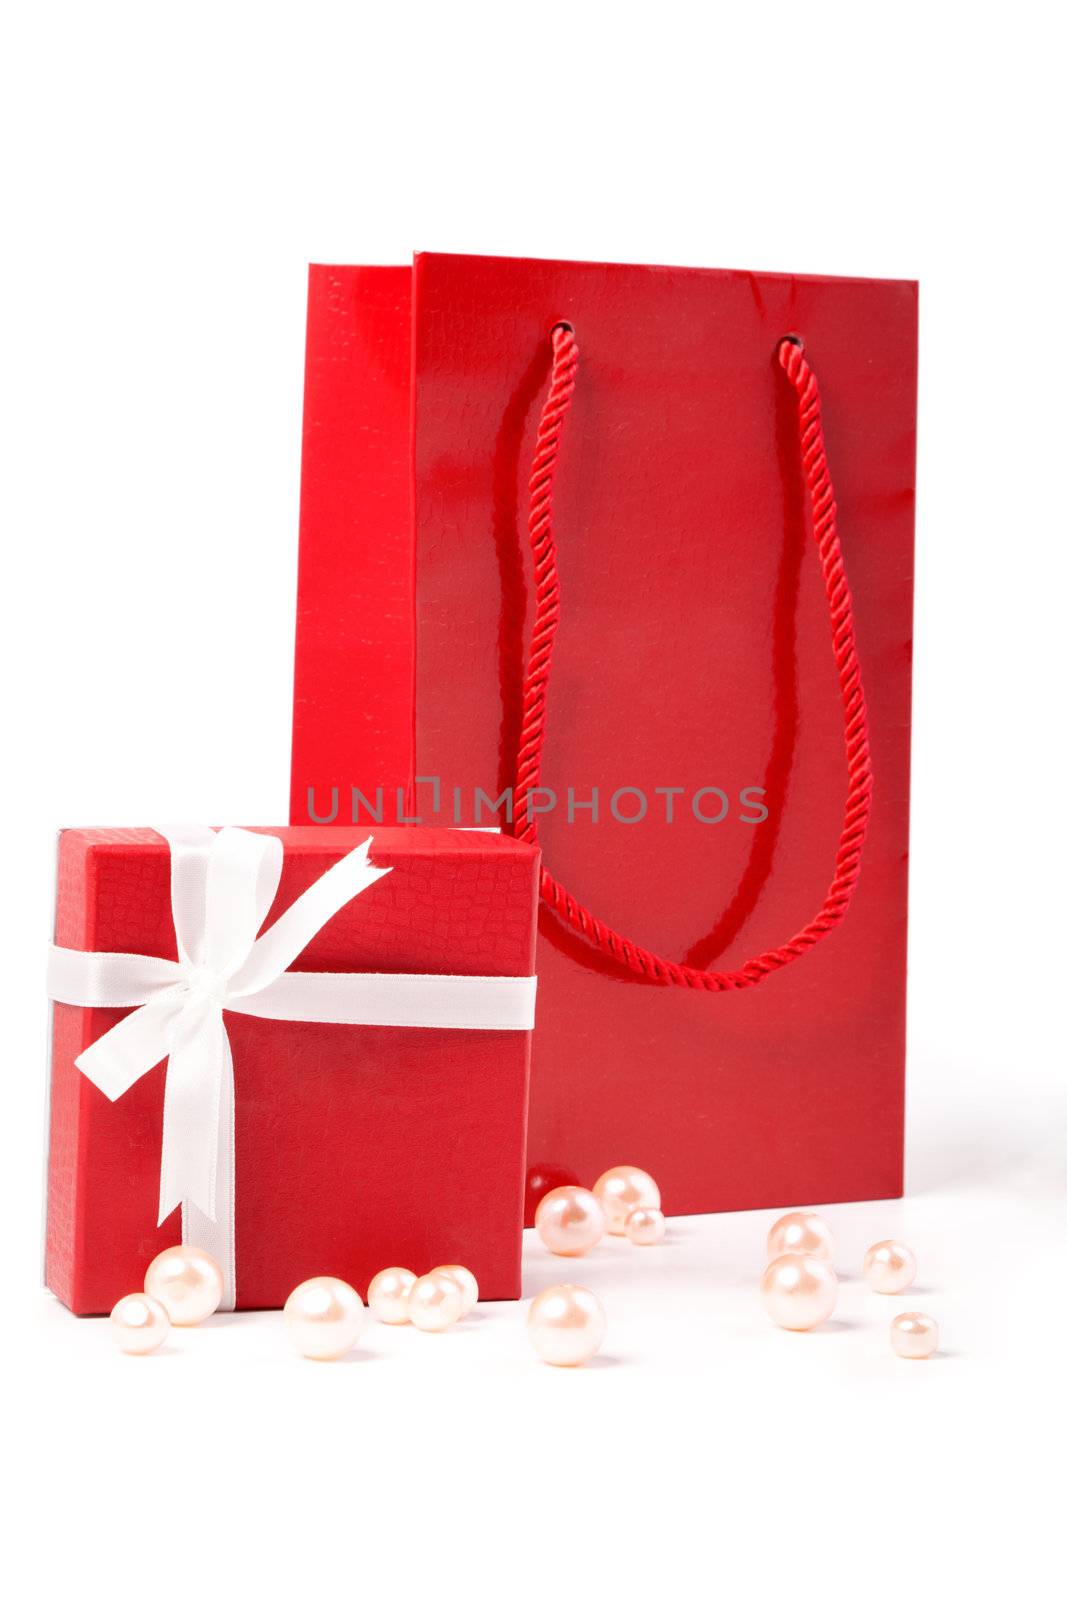 red gift and Gift bag, isolated on white background